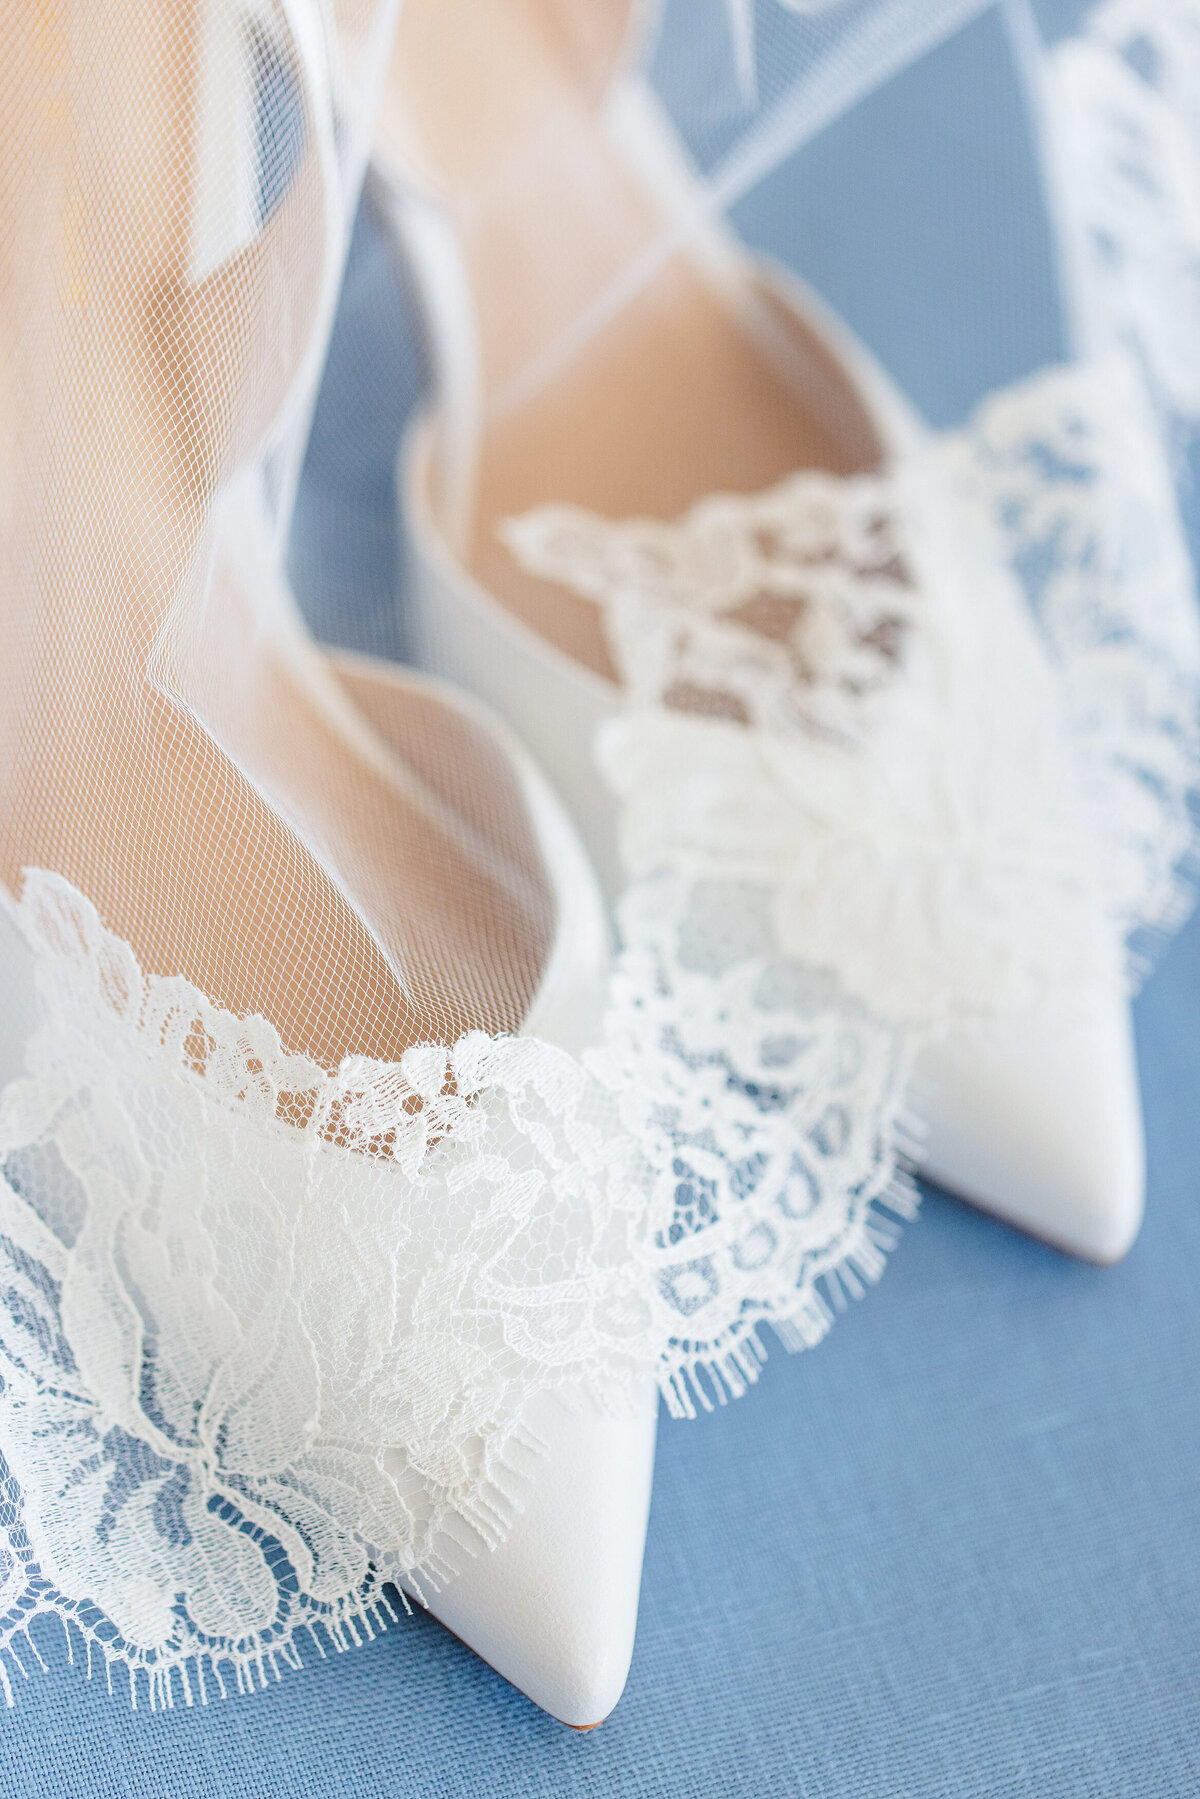 white shoes on blue background with veil lace detail